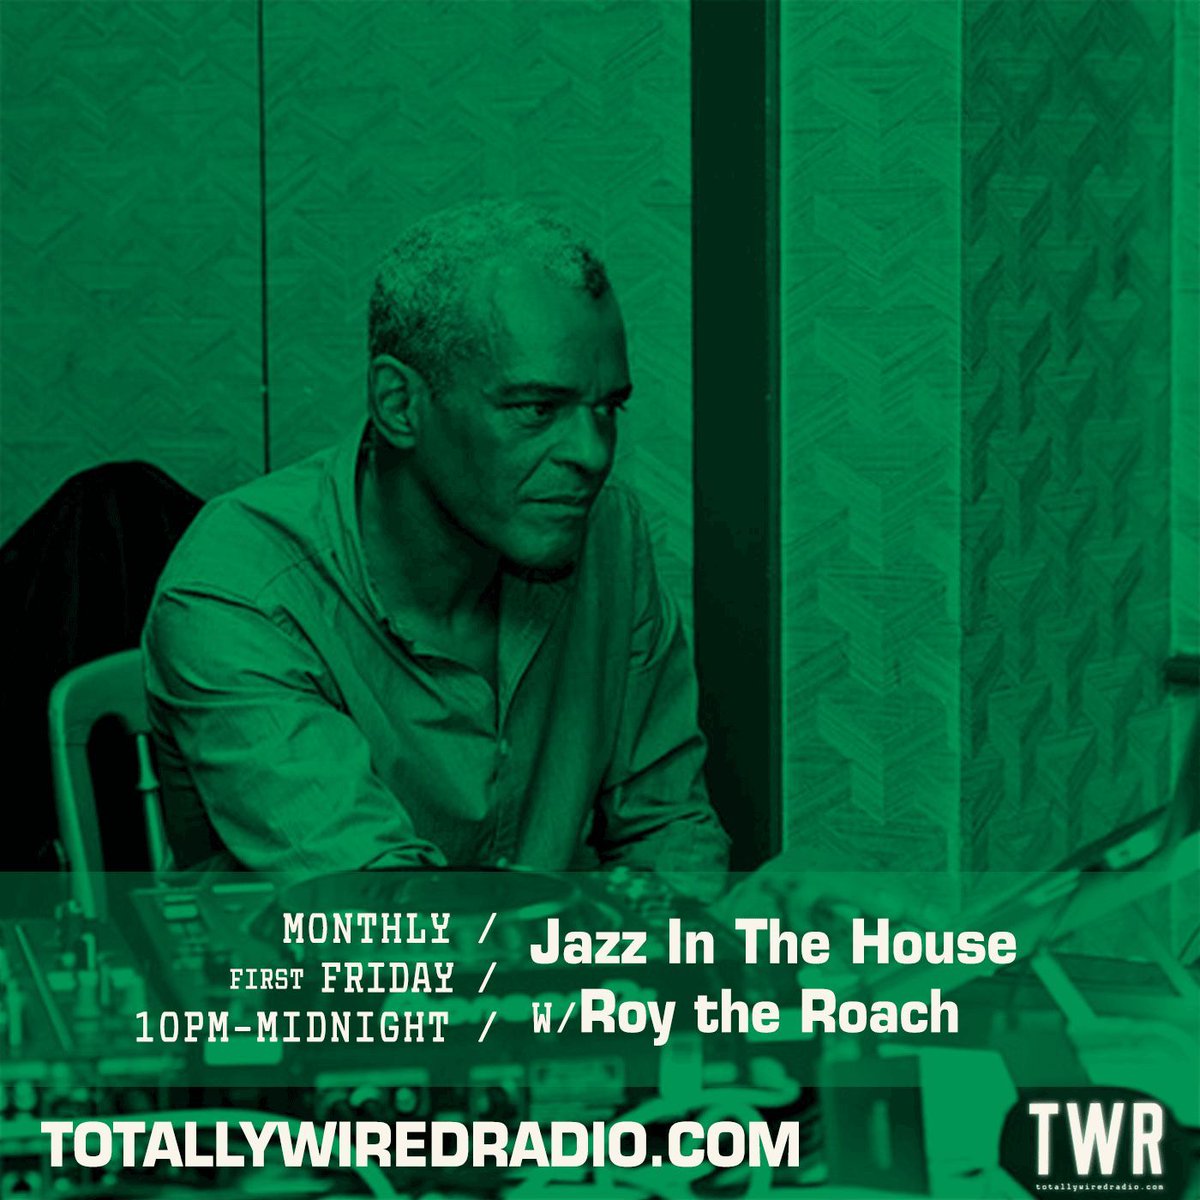 Jazz In The House w/ Roy the Roach #startingsoon on #TotallyWiredRadio Listen @ Link in bio. 
-
#MusicIsLife #London
-
#JazzHouse #SoulfulHouse #DeepHouse #Jazz